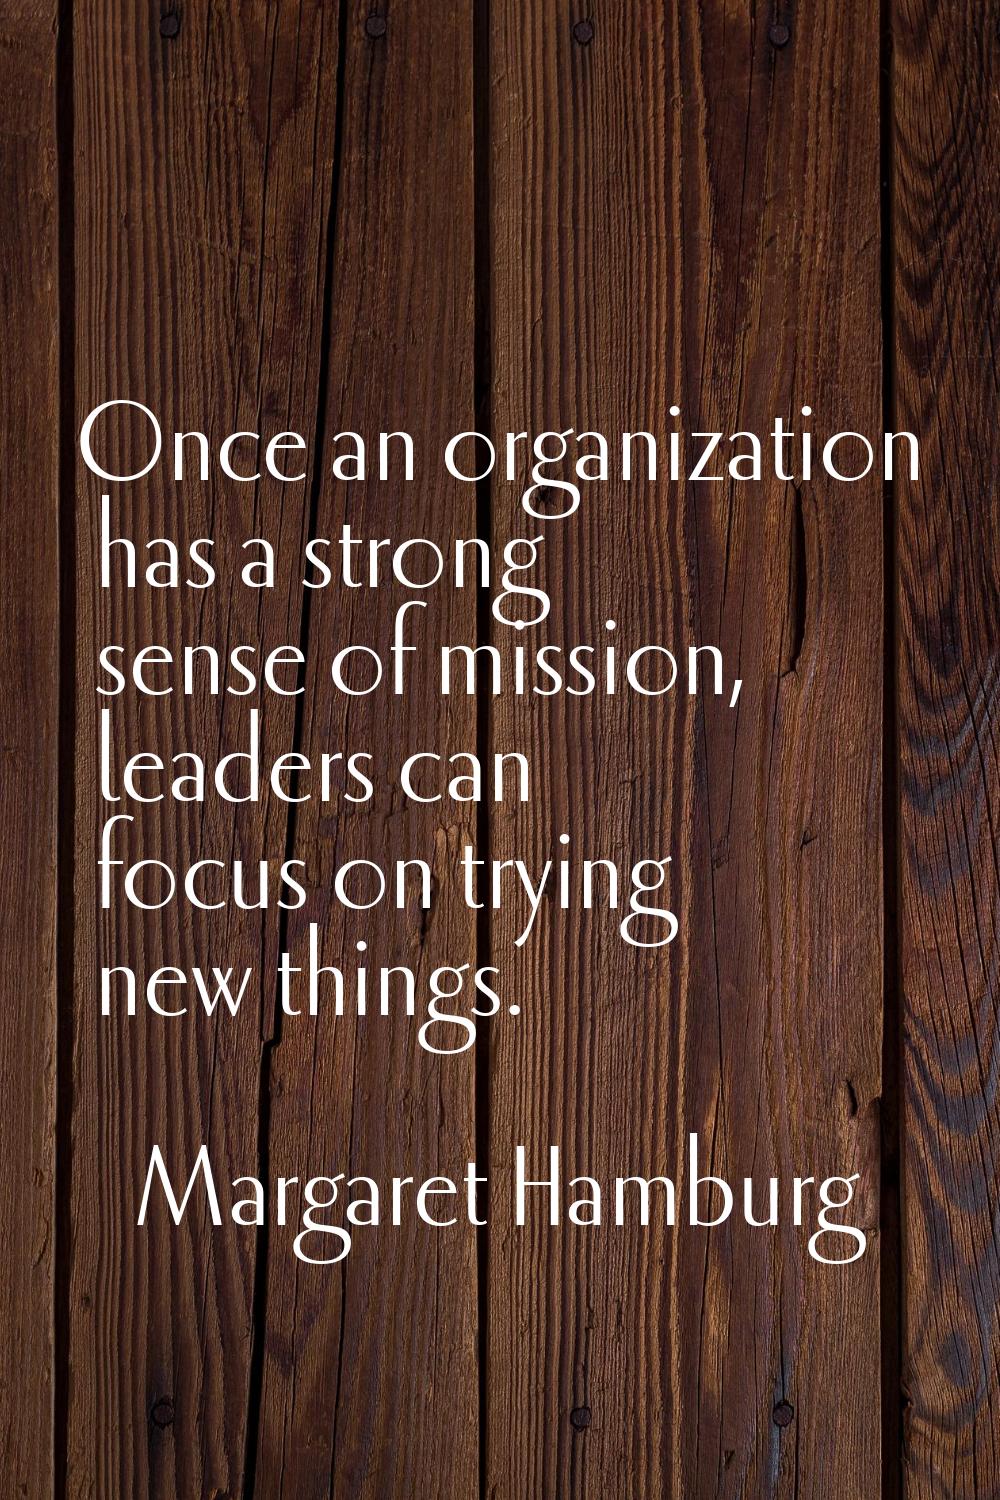 Once an organization has a strong sense of mission, leaders can focus on trying new things.